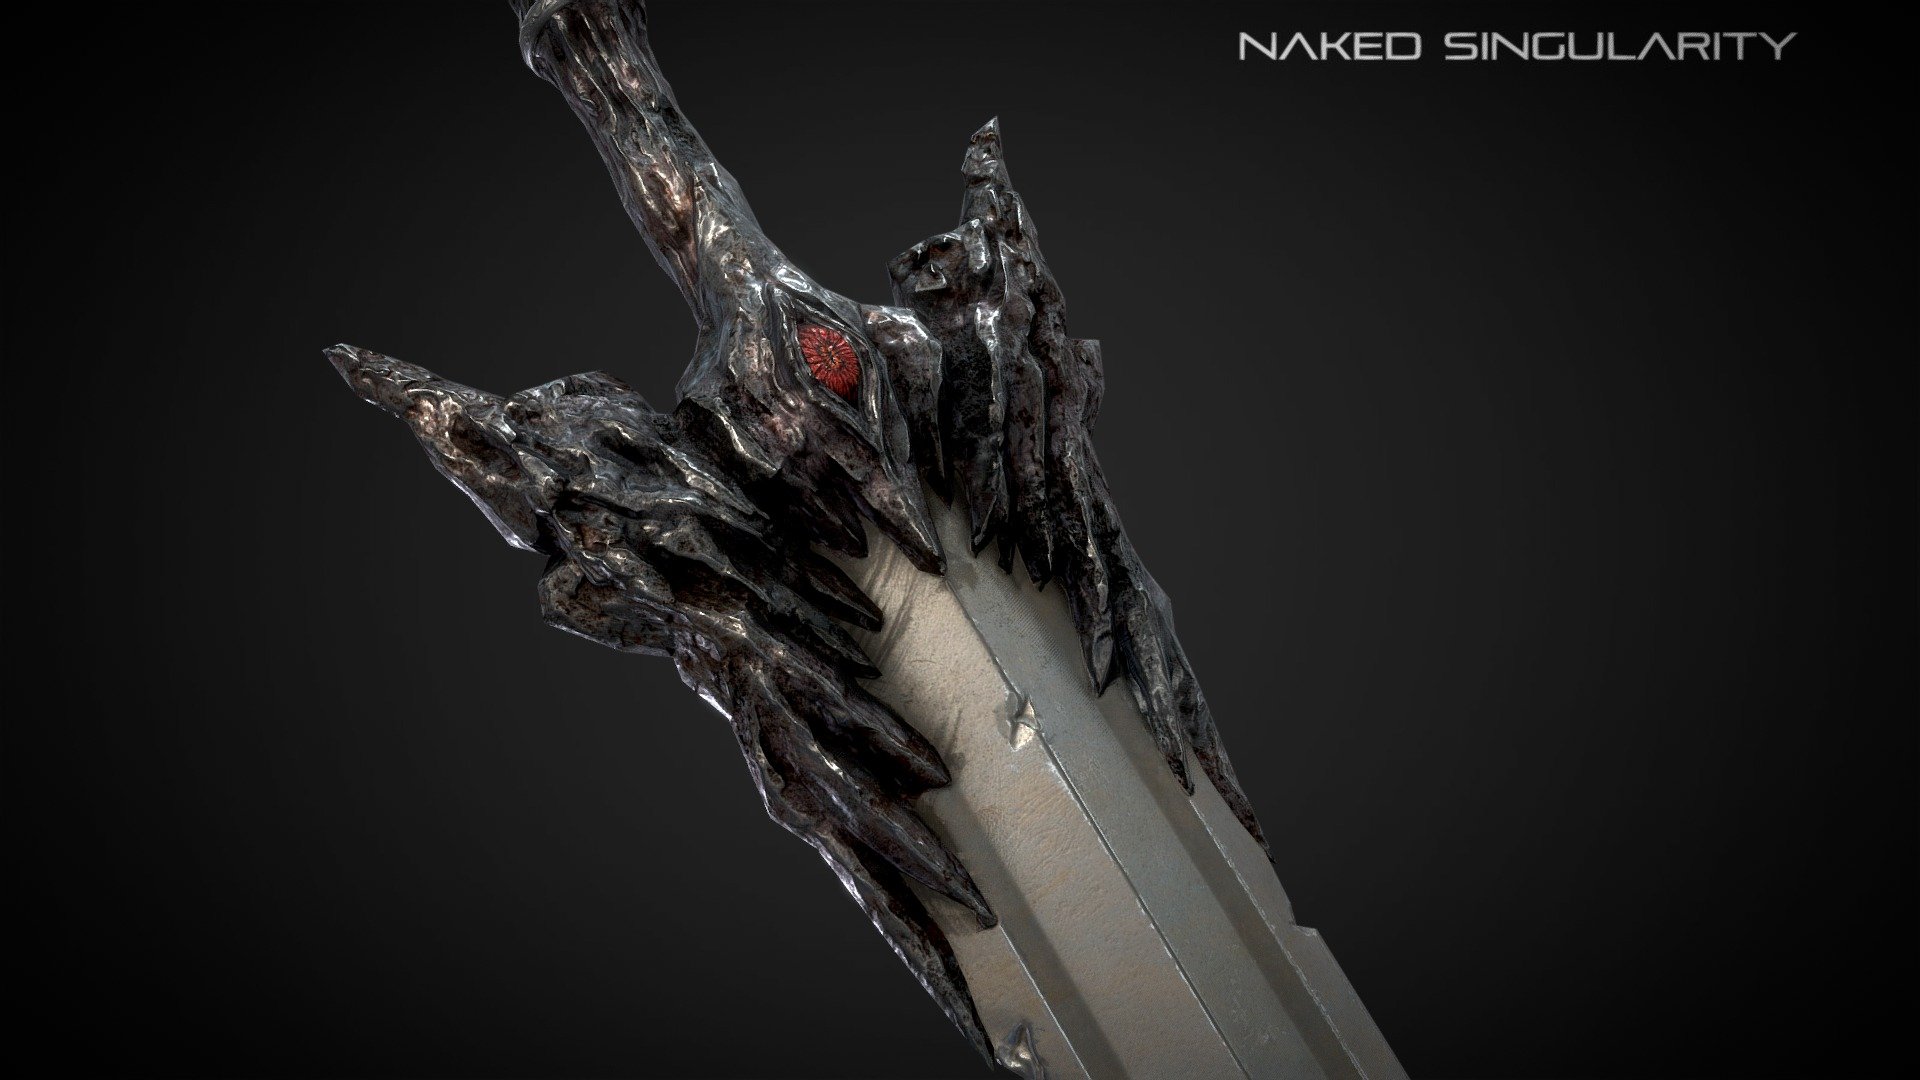 Evil Eye Greatsword | Medieval dark fantasy weapon | 4K | Lowpoly

Original concept by Naked Singularity. Inspire by Dark Souls triology and Elden Ring


High quality low poly model.
4K High resolution texture.
UV channel 2 unwrapped (for lightmap in Unity, Unreal Engine).
Real world scale.
PBR texturing.

Check out other Dark fantasy game asset here

Customer support: nakedsingularity.studio@gmail.com

Follow us on: Youtube | Facebook | Instagram | Twitter | Artstation - Evil Eye Greatsword Medieval dark fantasy weapon - Buy Royalty Free 3D model by Naked Singularity (@nakedsingularity) 3d model